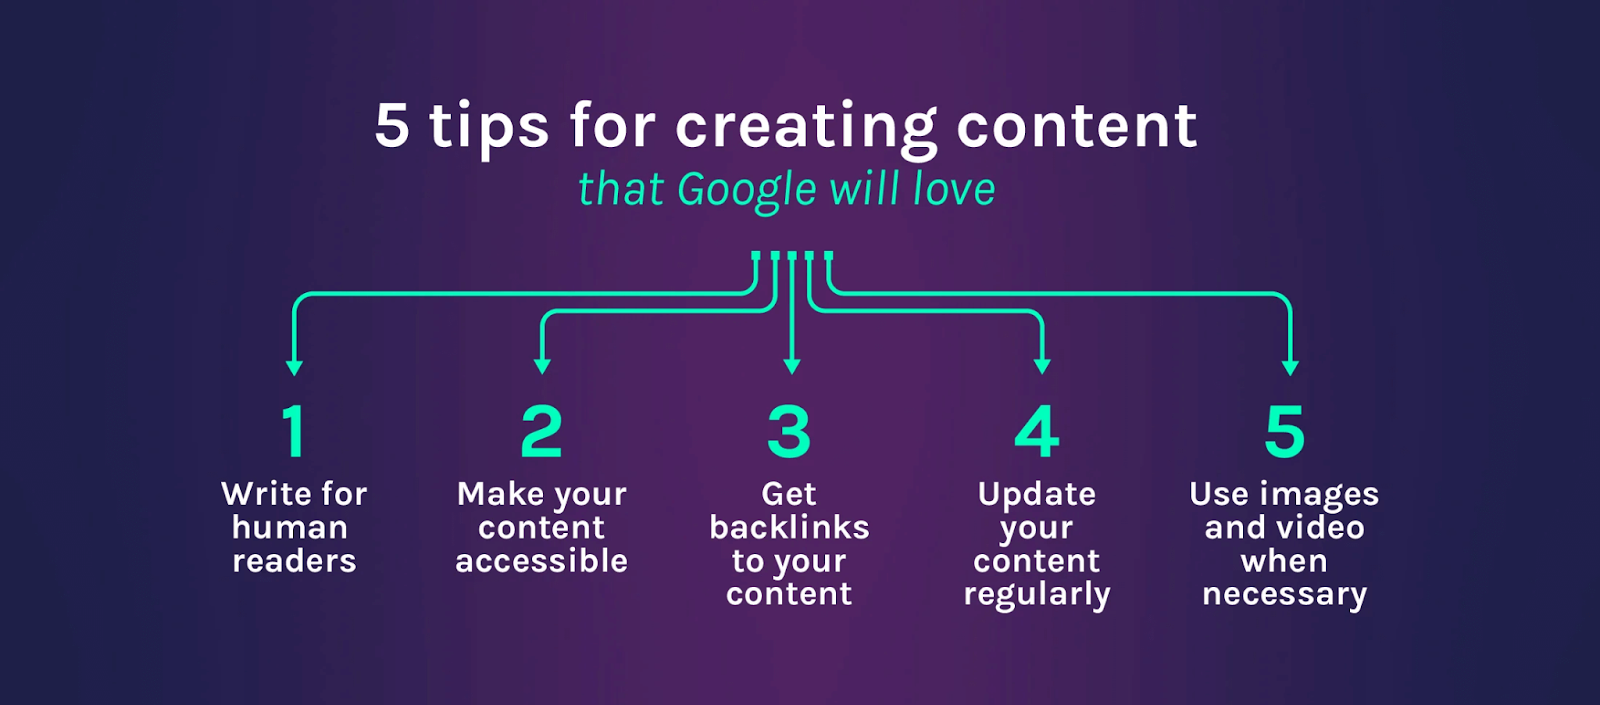 image featuring five tips for creating content that google will love. the tips include writing for human readers, making content accessible, acquiring backlinks, regularly updating content, and using images and videos when appropriate. the tips are displayed in a colourful and easy-to-read graphic.